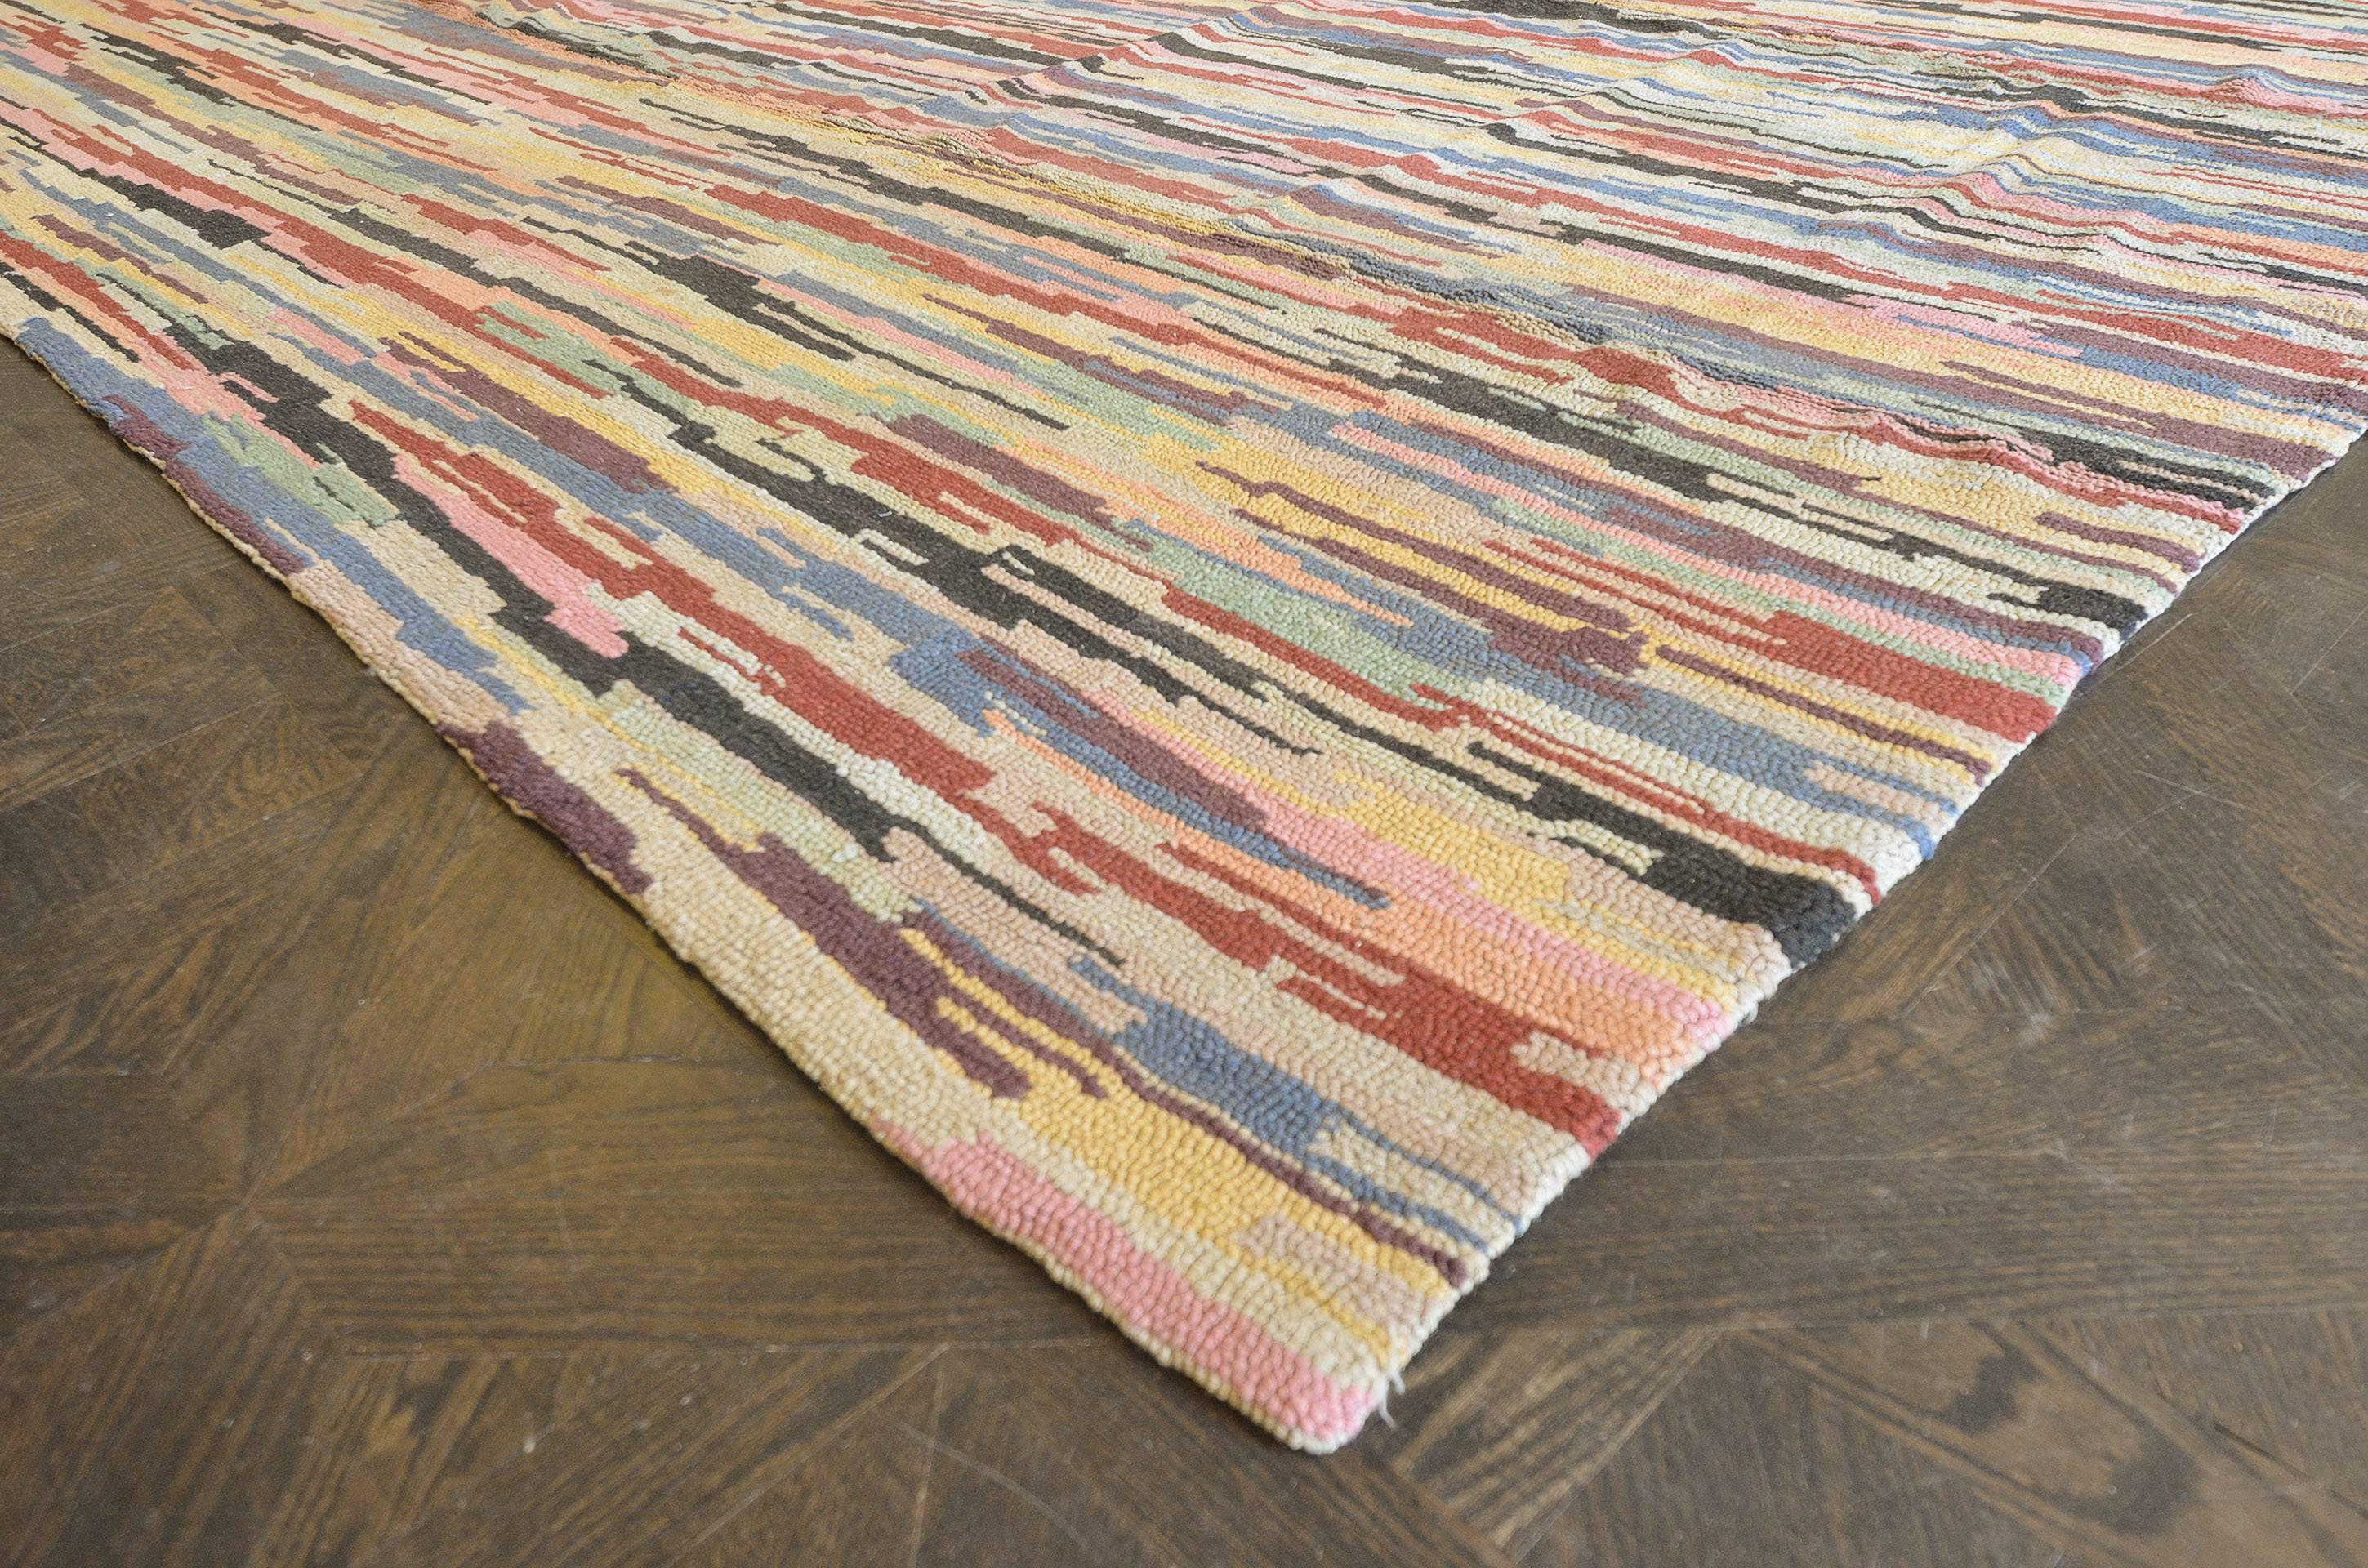 Hand-Woven Mid-20th Century Hooked Rug from North America For Sale